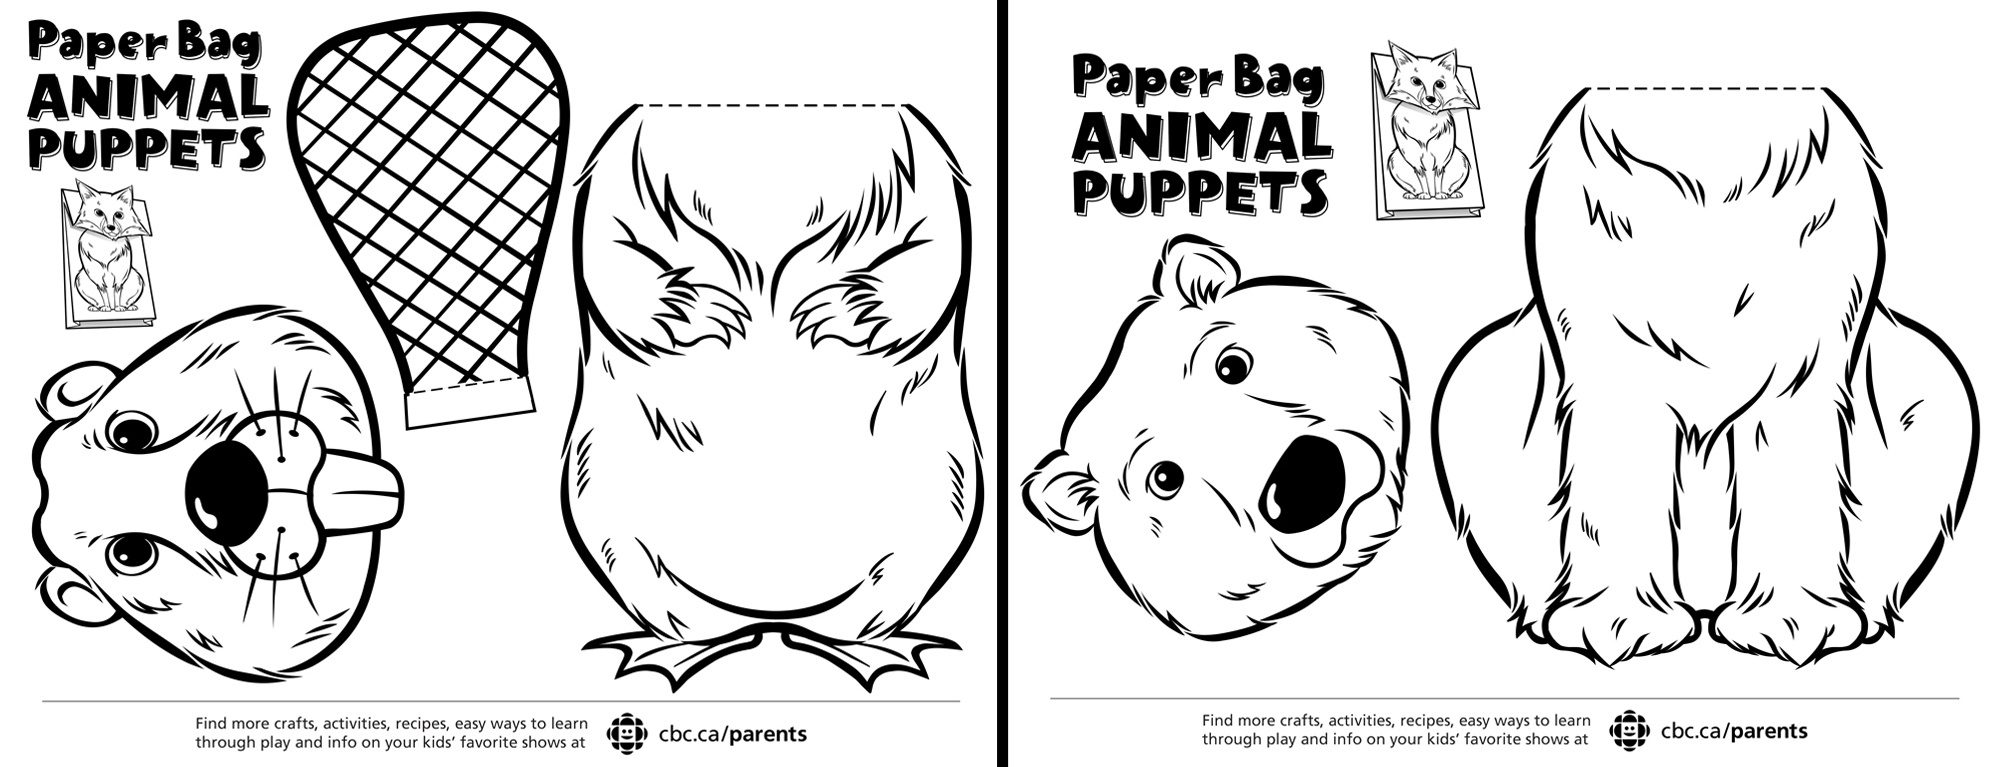 Canadian Animal Paper Bag Puppets | Play | Cbc Parents - Free Printable Paper Bag Puppet Templates